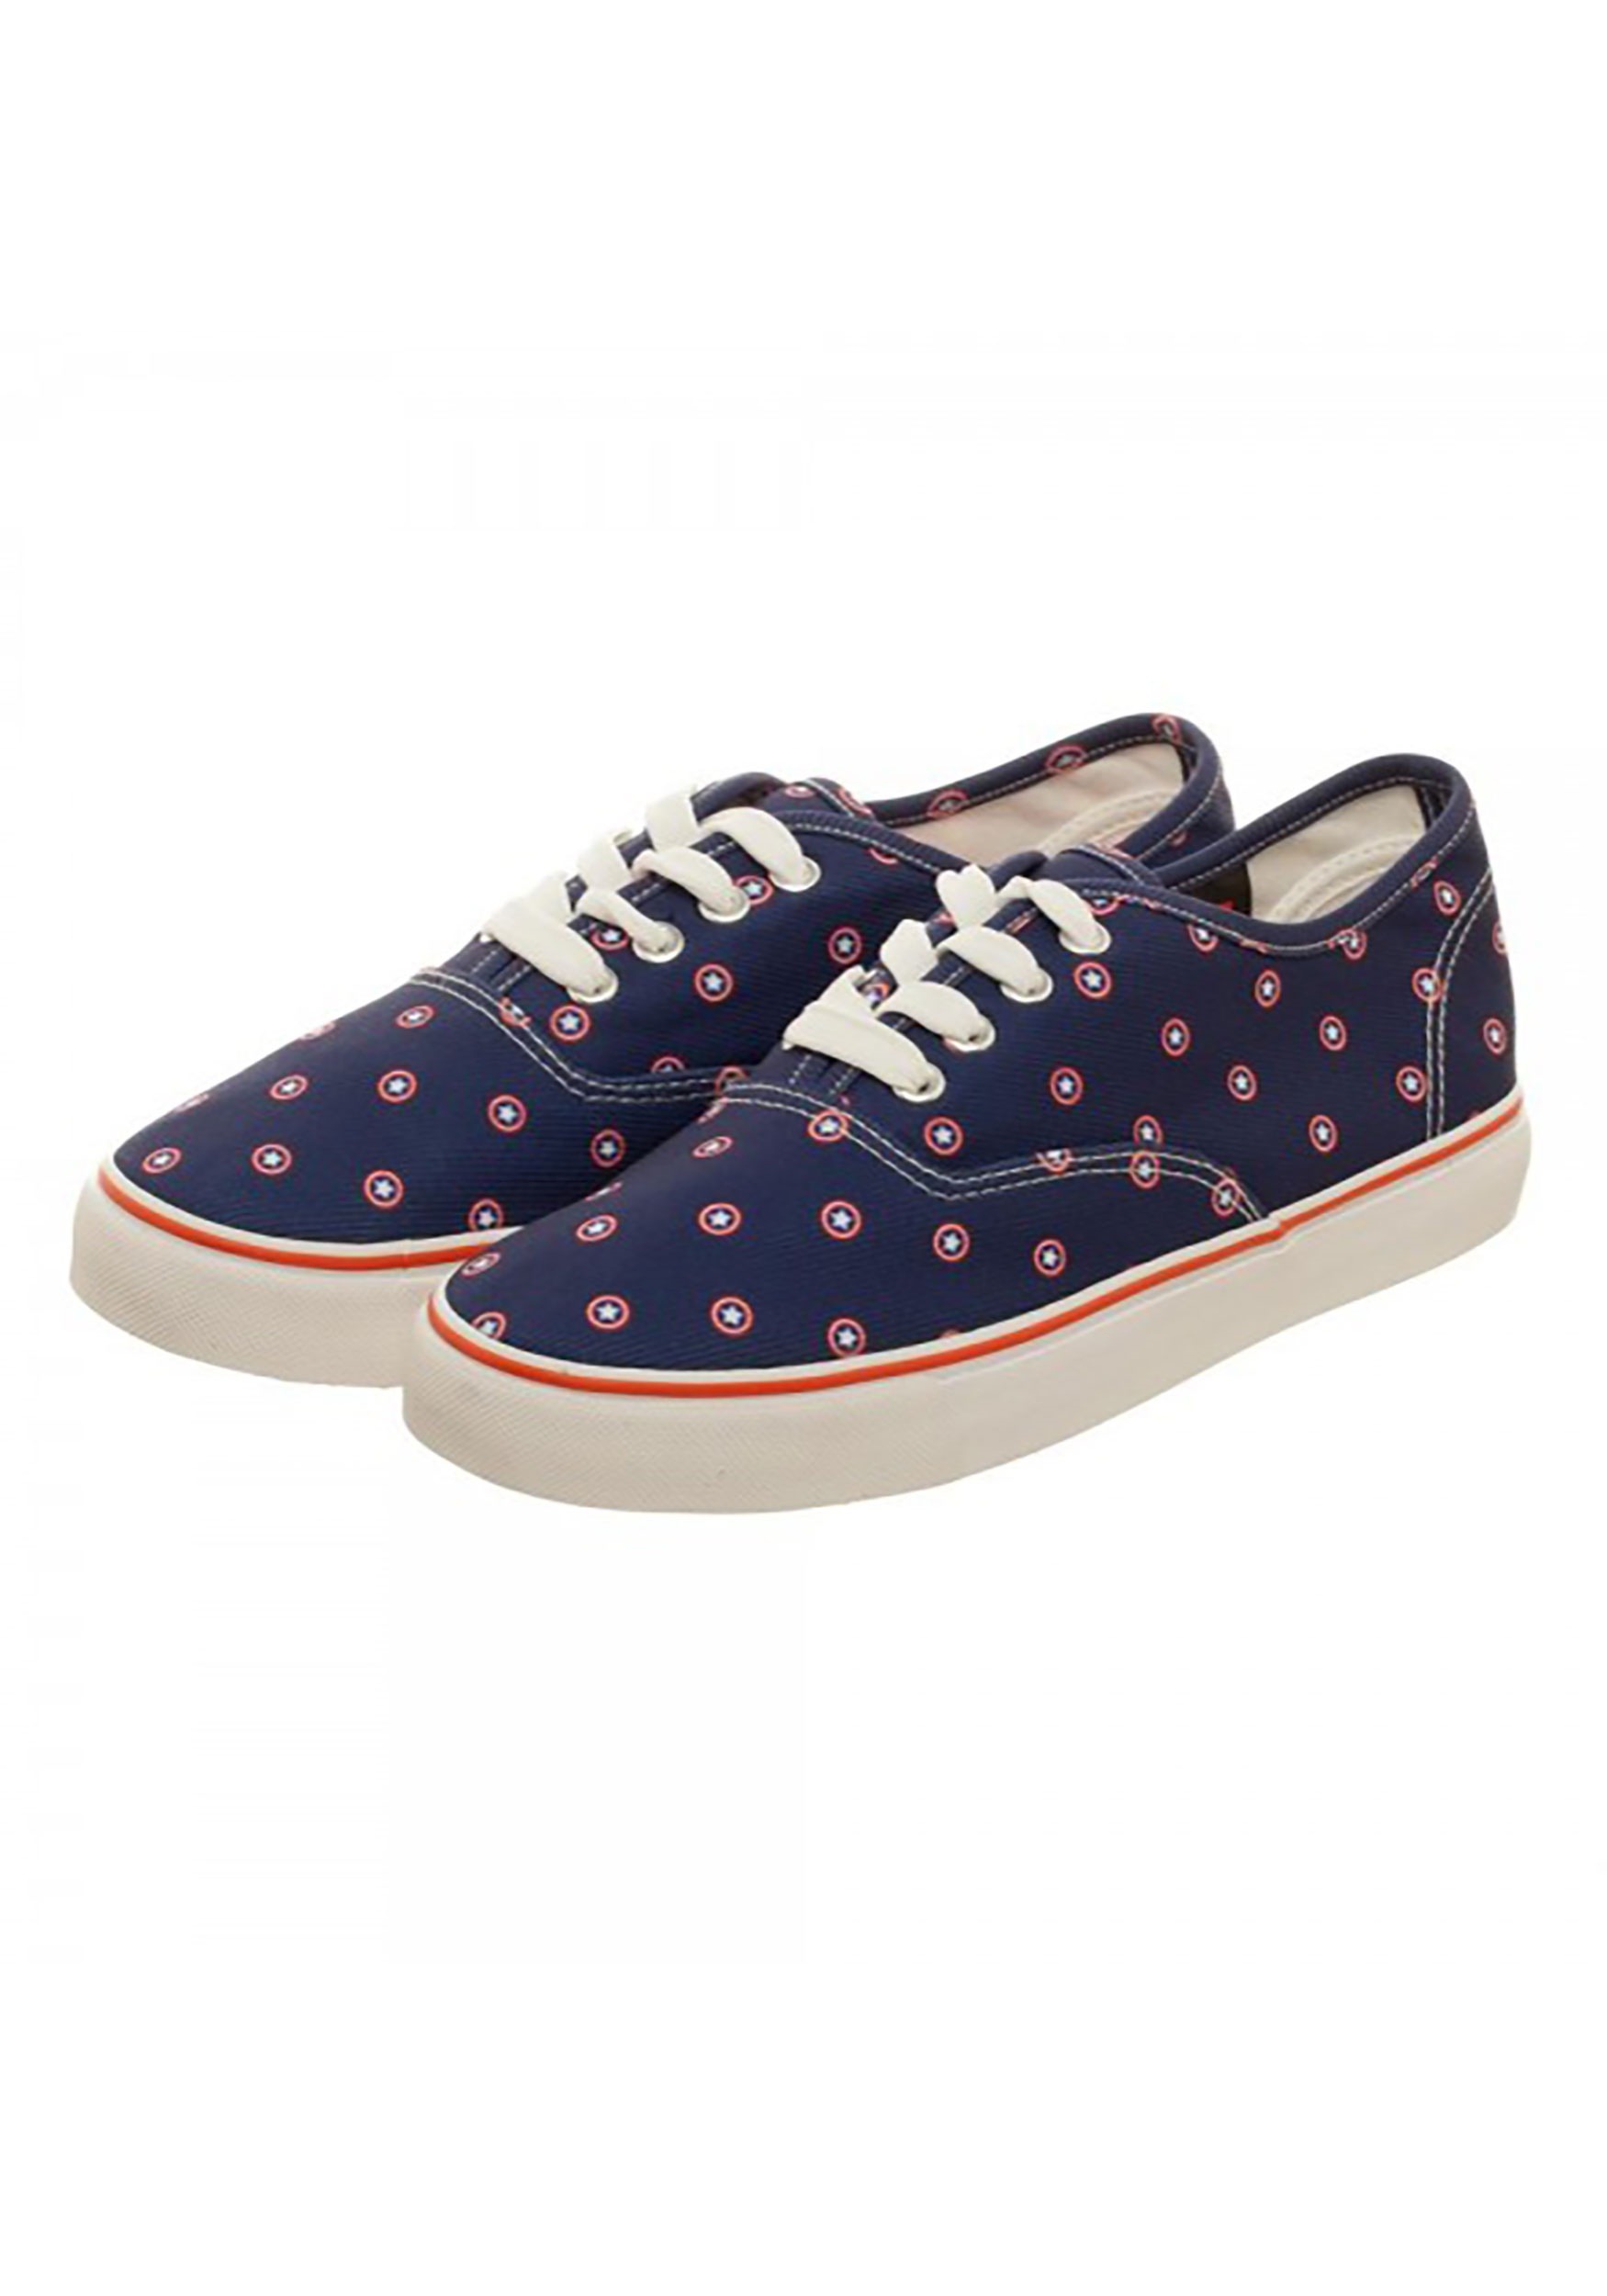 navy casual shoes ladies